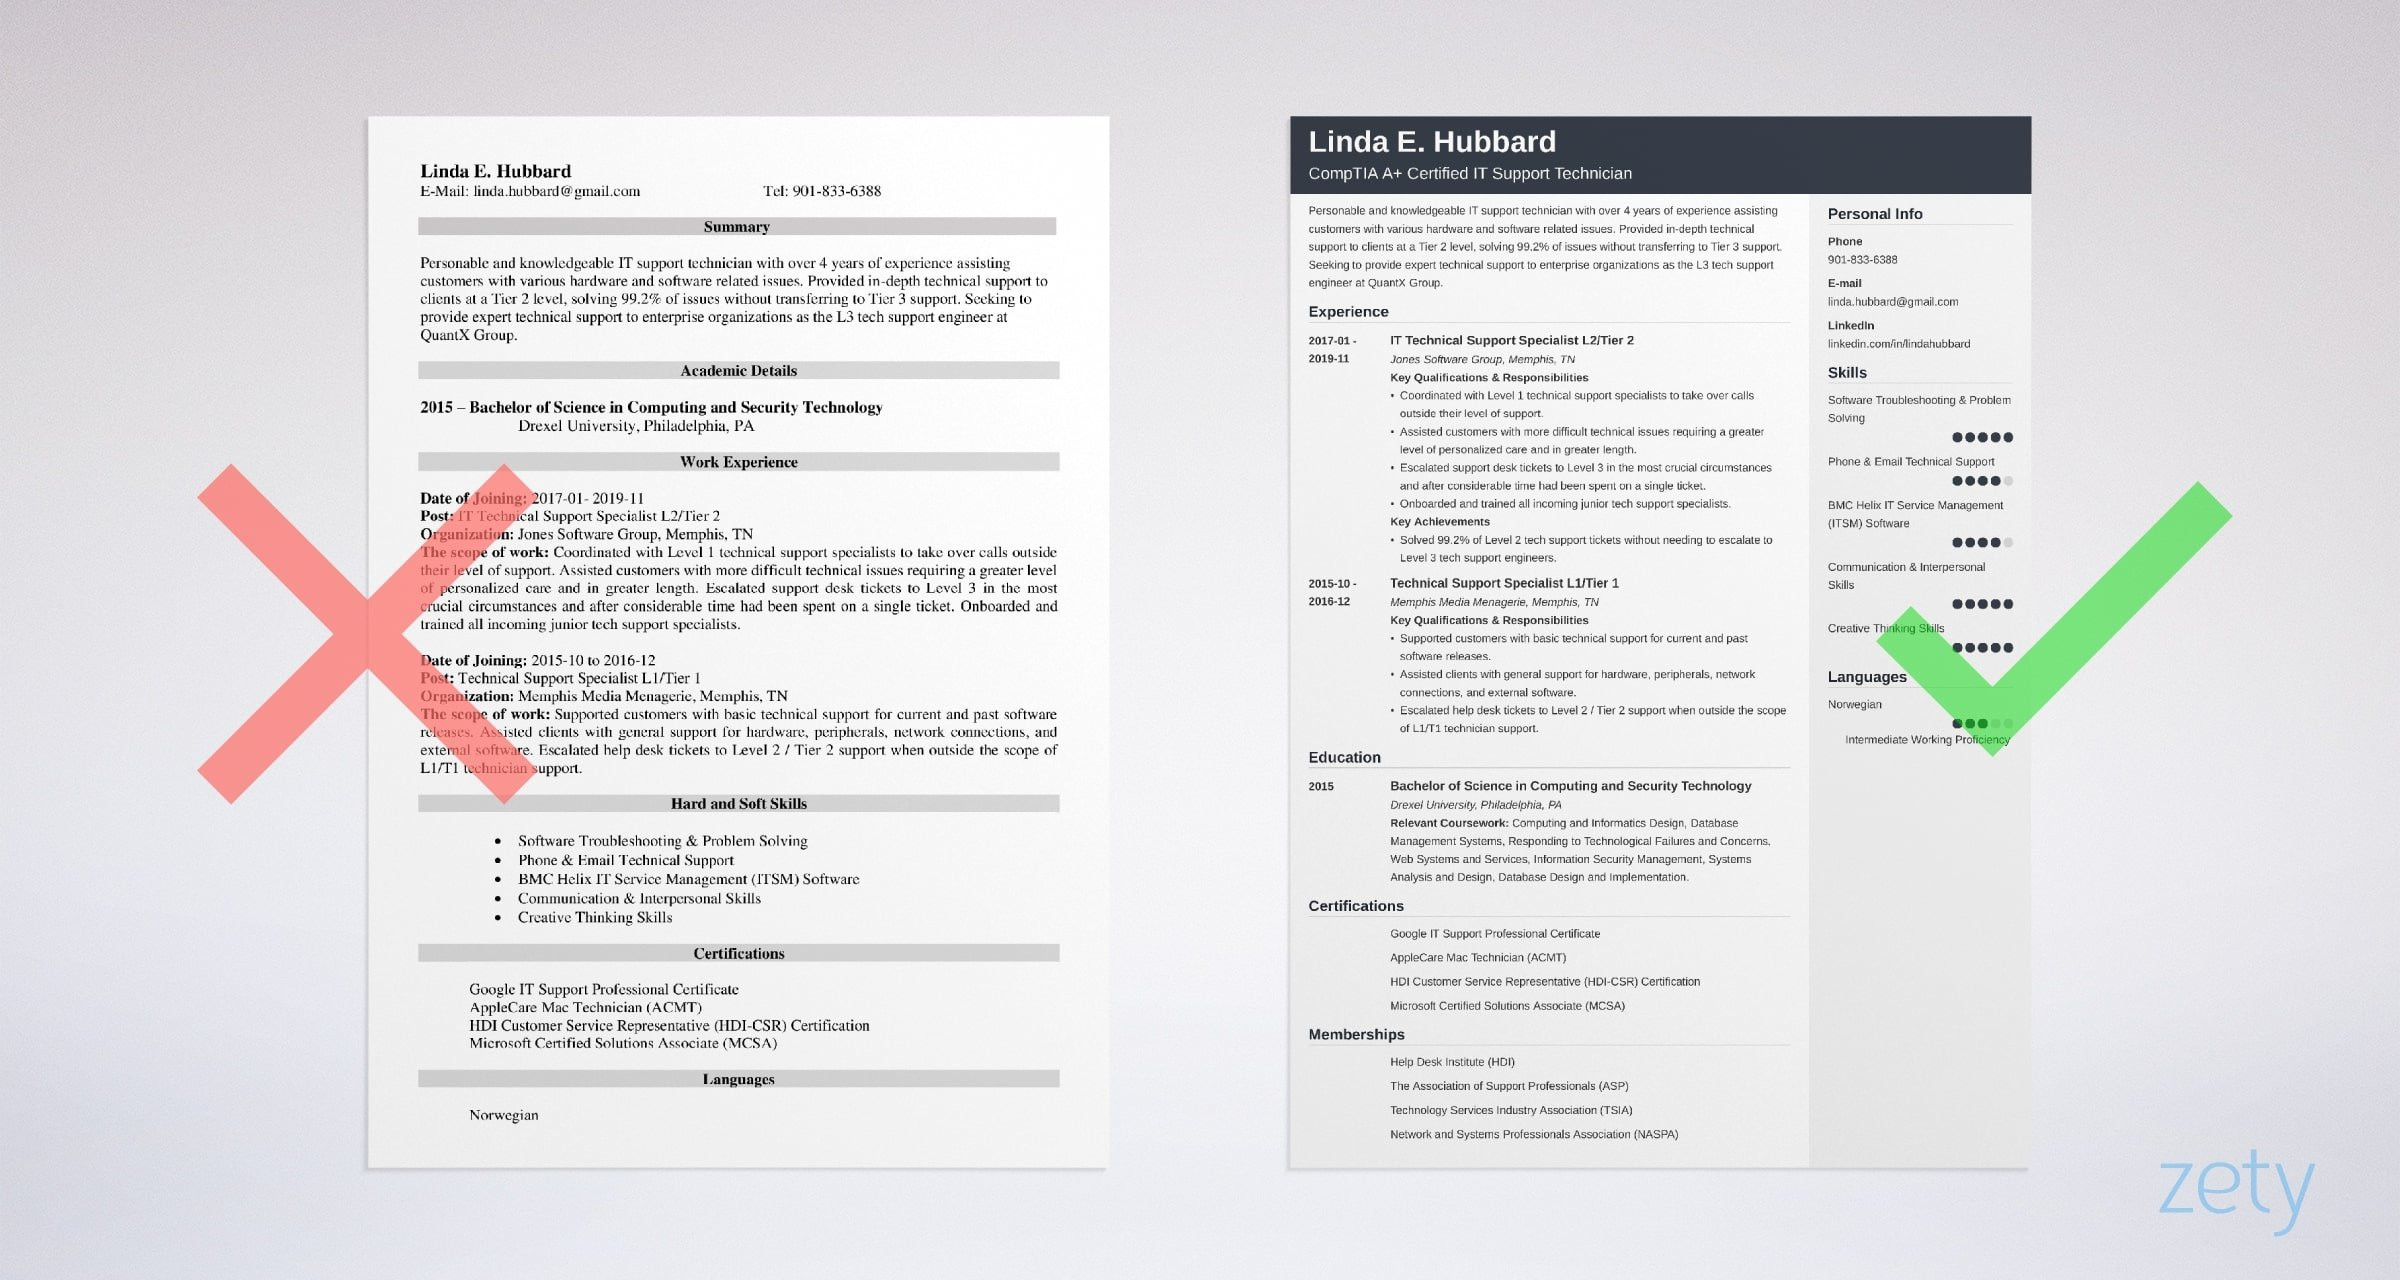 Sample Resume for Production Support Engineer Technical Support Resume Sample & Job Description [20 Tips]